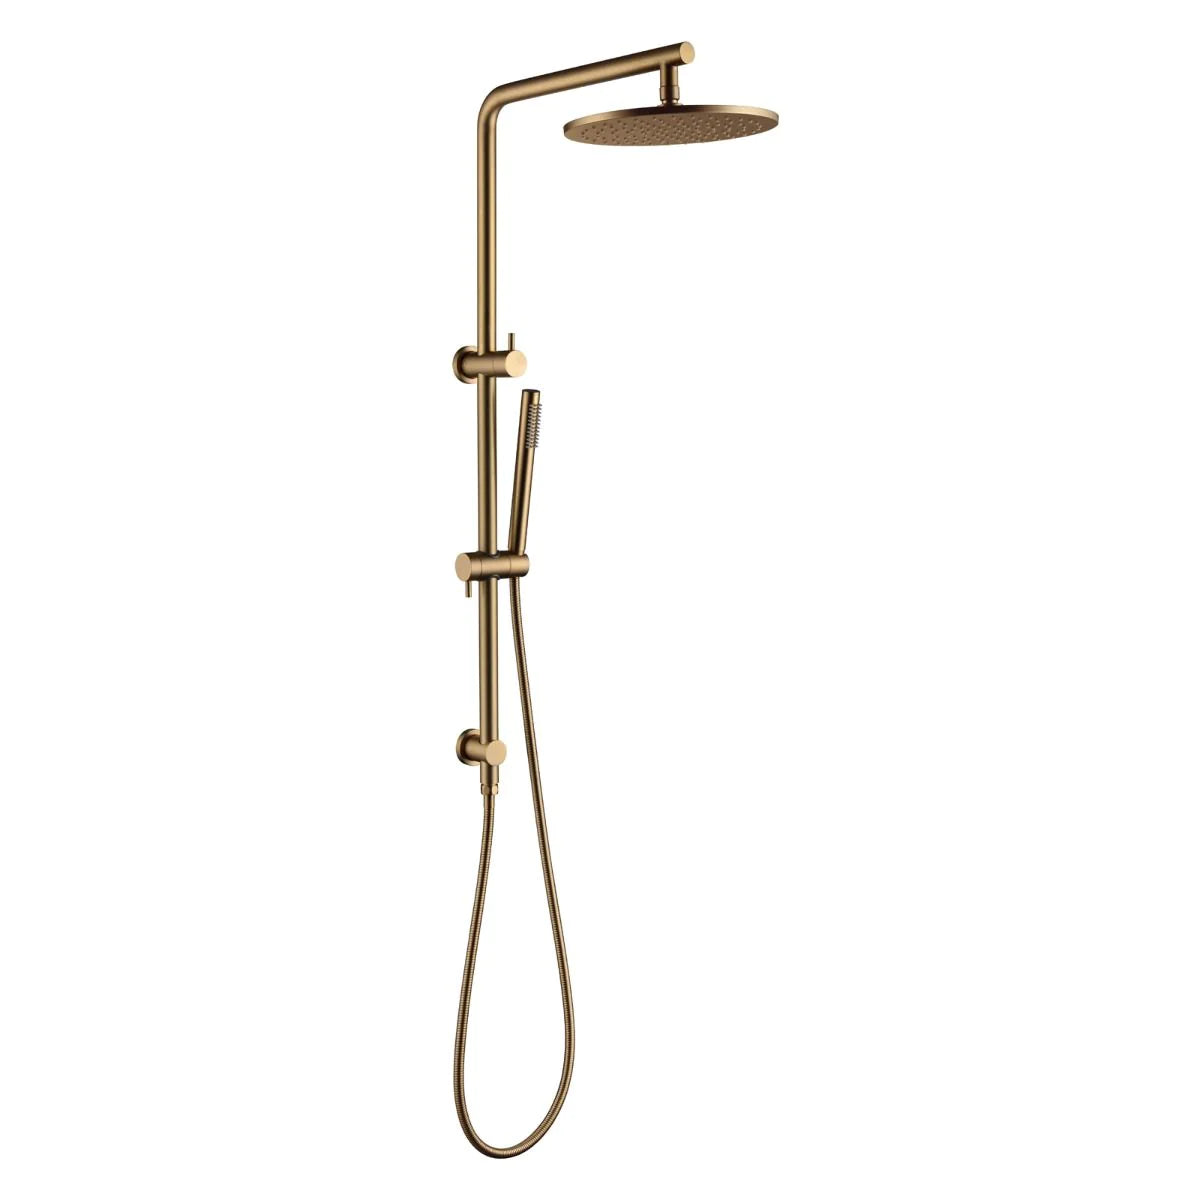 Pentro 250mm Round Handheld Shower Station, Sleek and Functional Design-Brushed Yellow Gold-SR28A-04